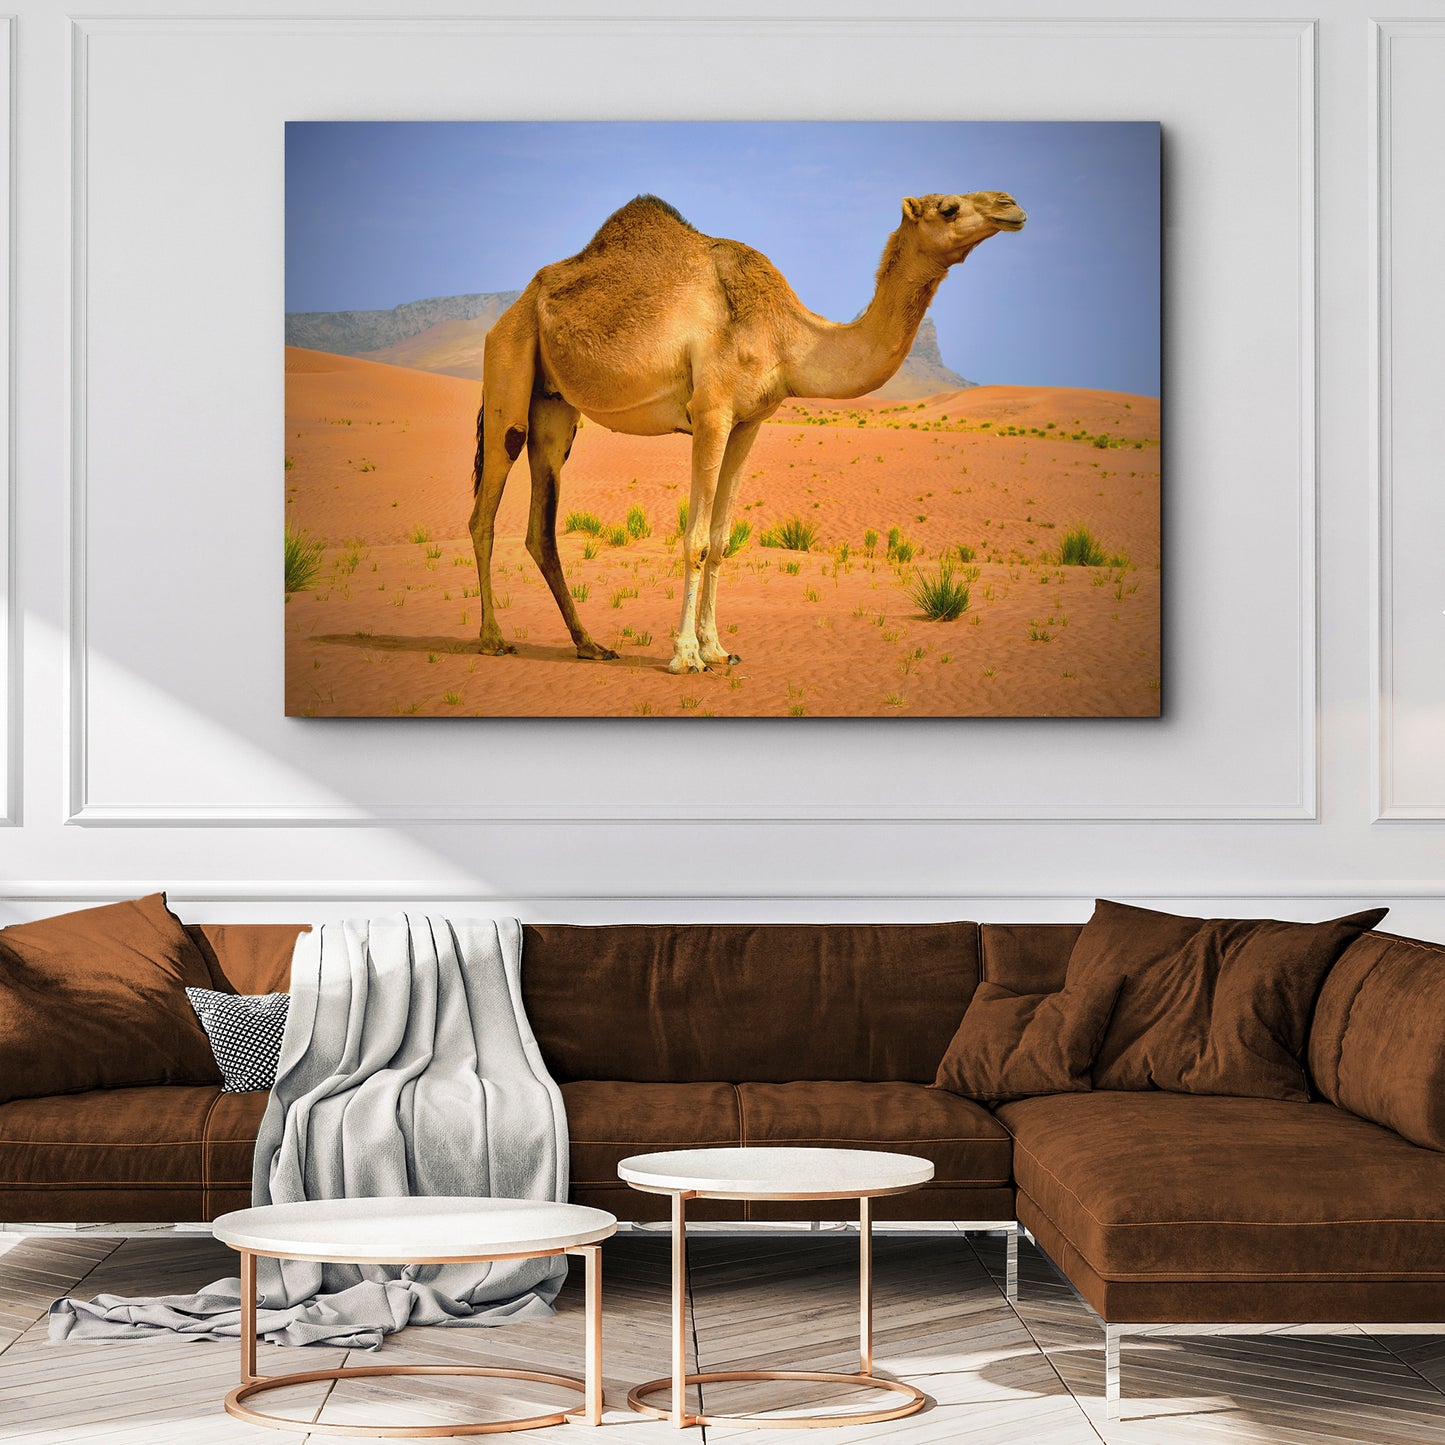 Arabian Camel Canvas Wall Art Style 2 - Image by Tailored Canvases